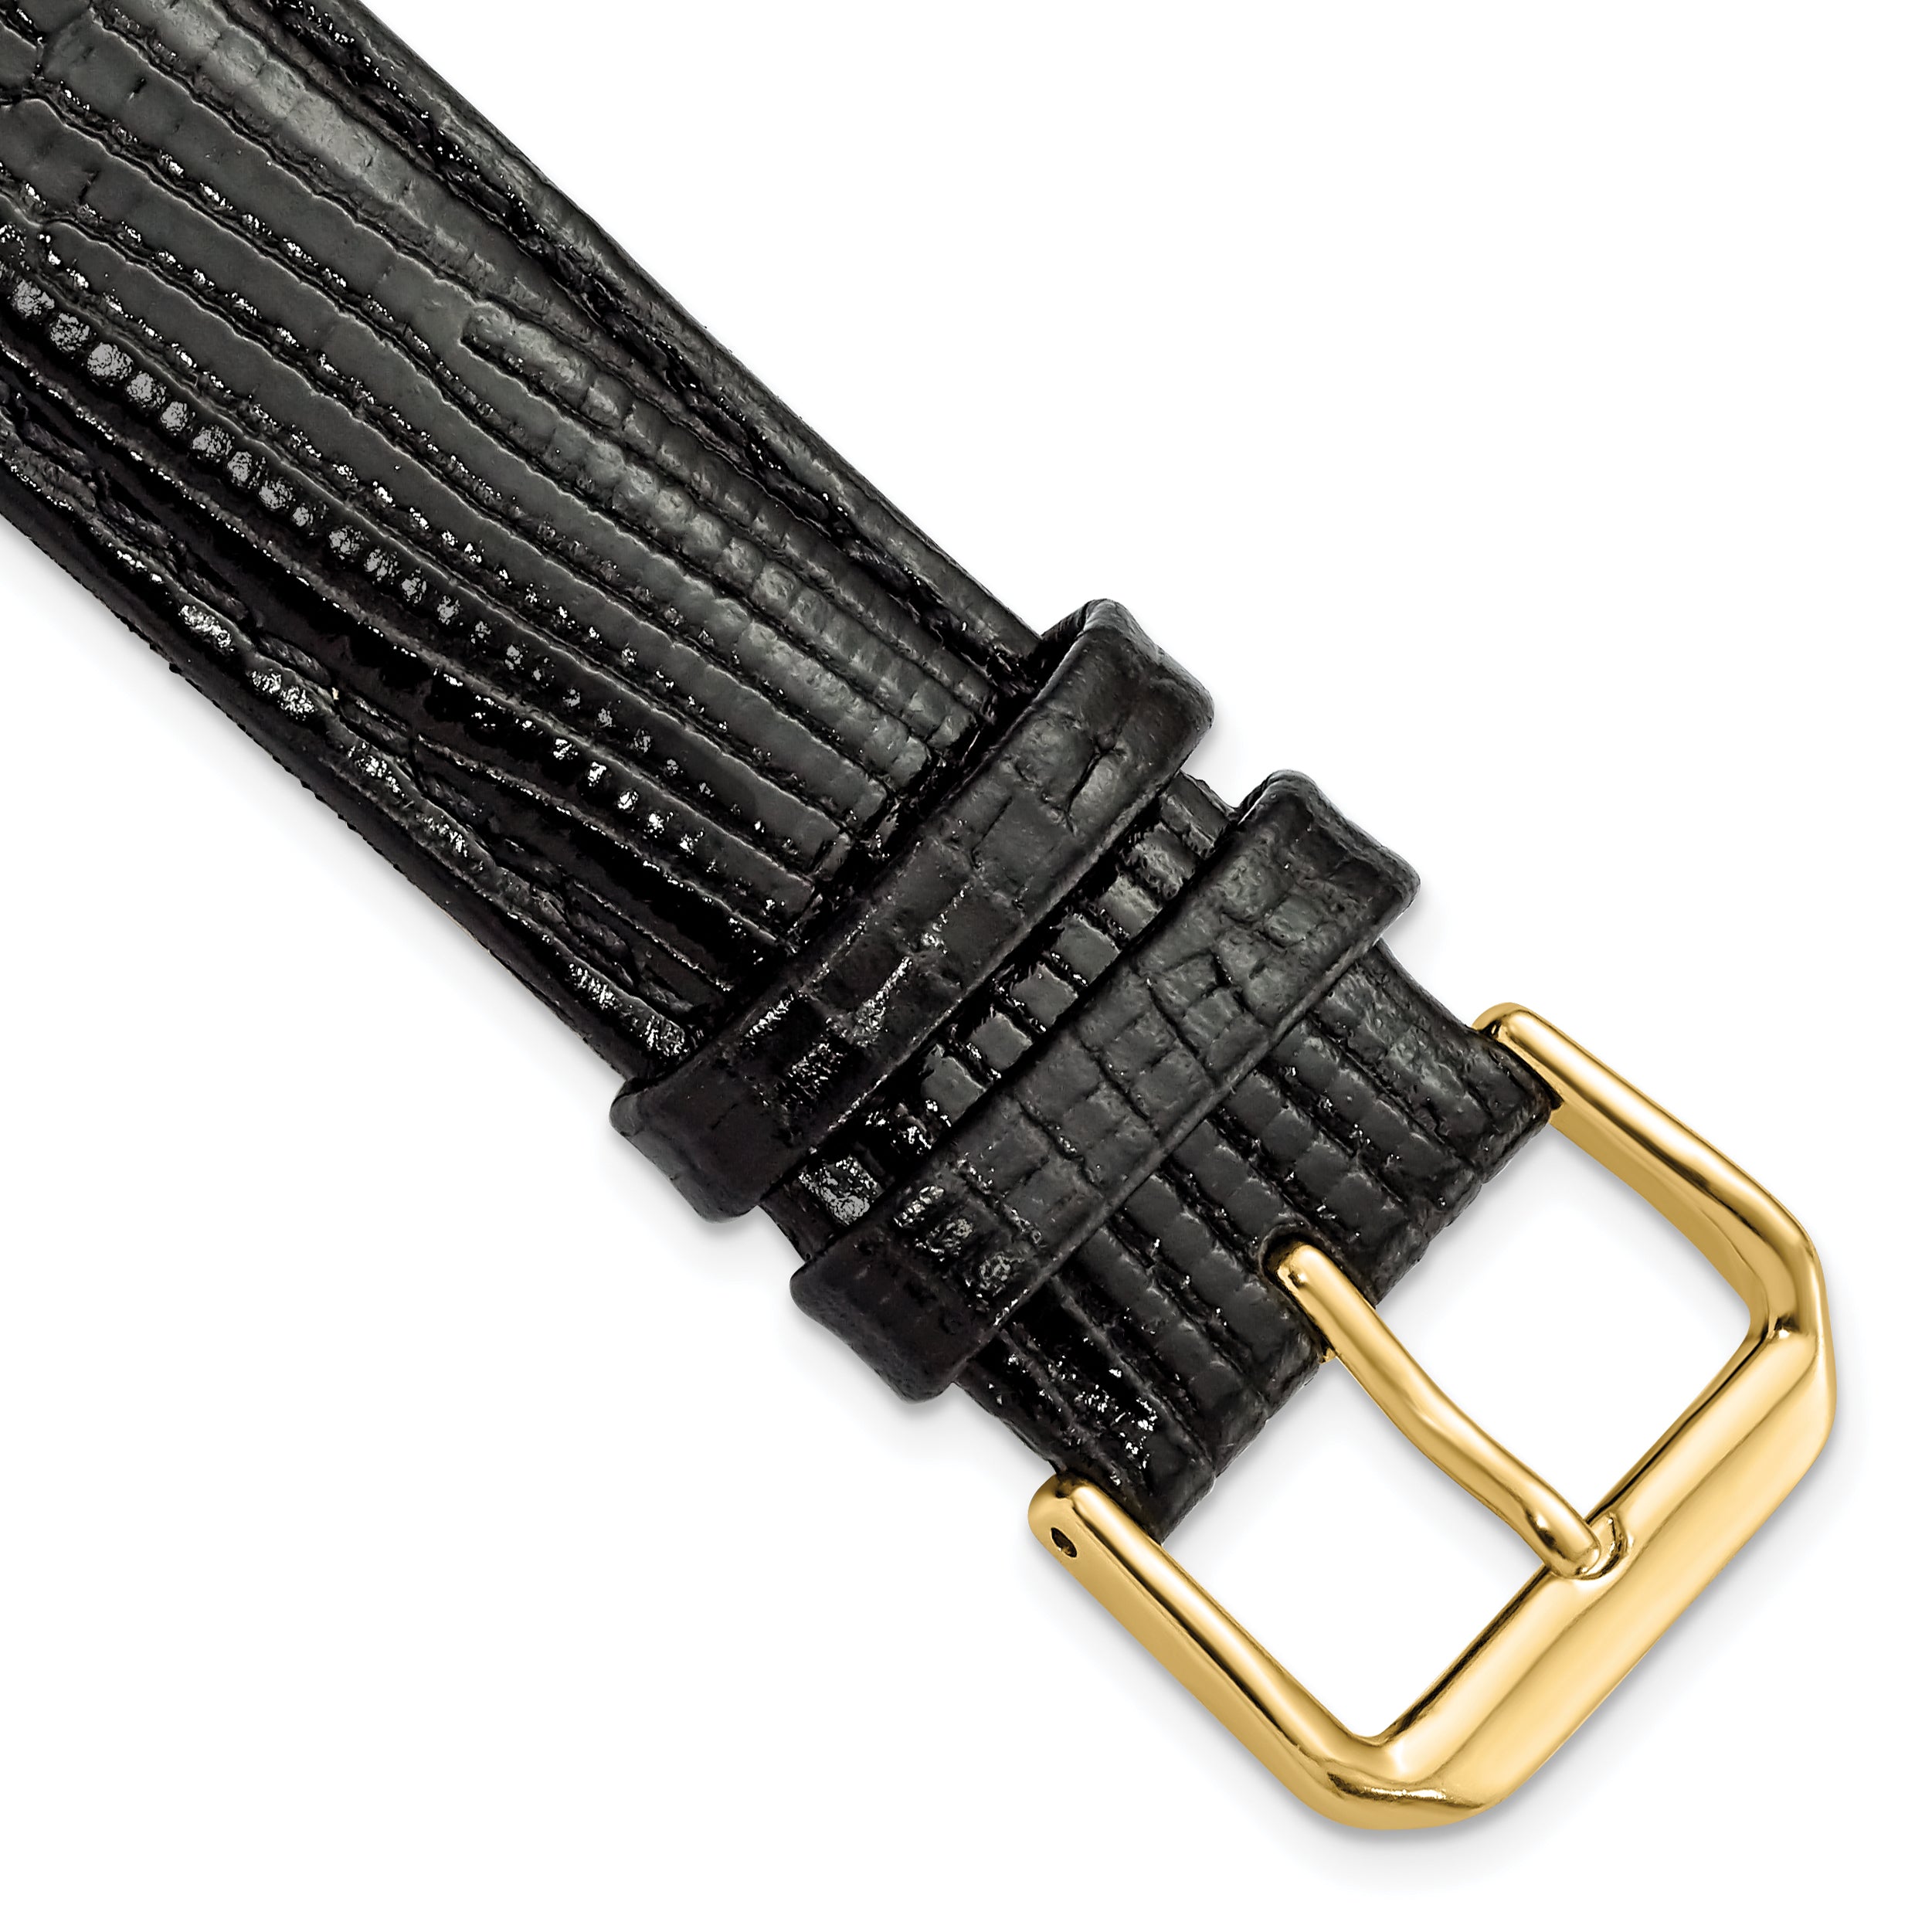 DeBeer 19mm Black Snake Grain Leather with Gold-tone Buckle 7.5 inch Watch Band